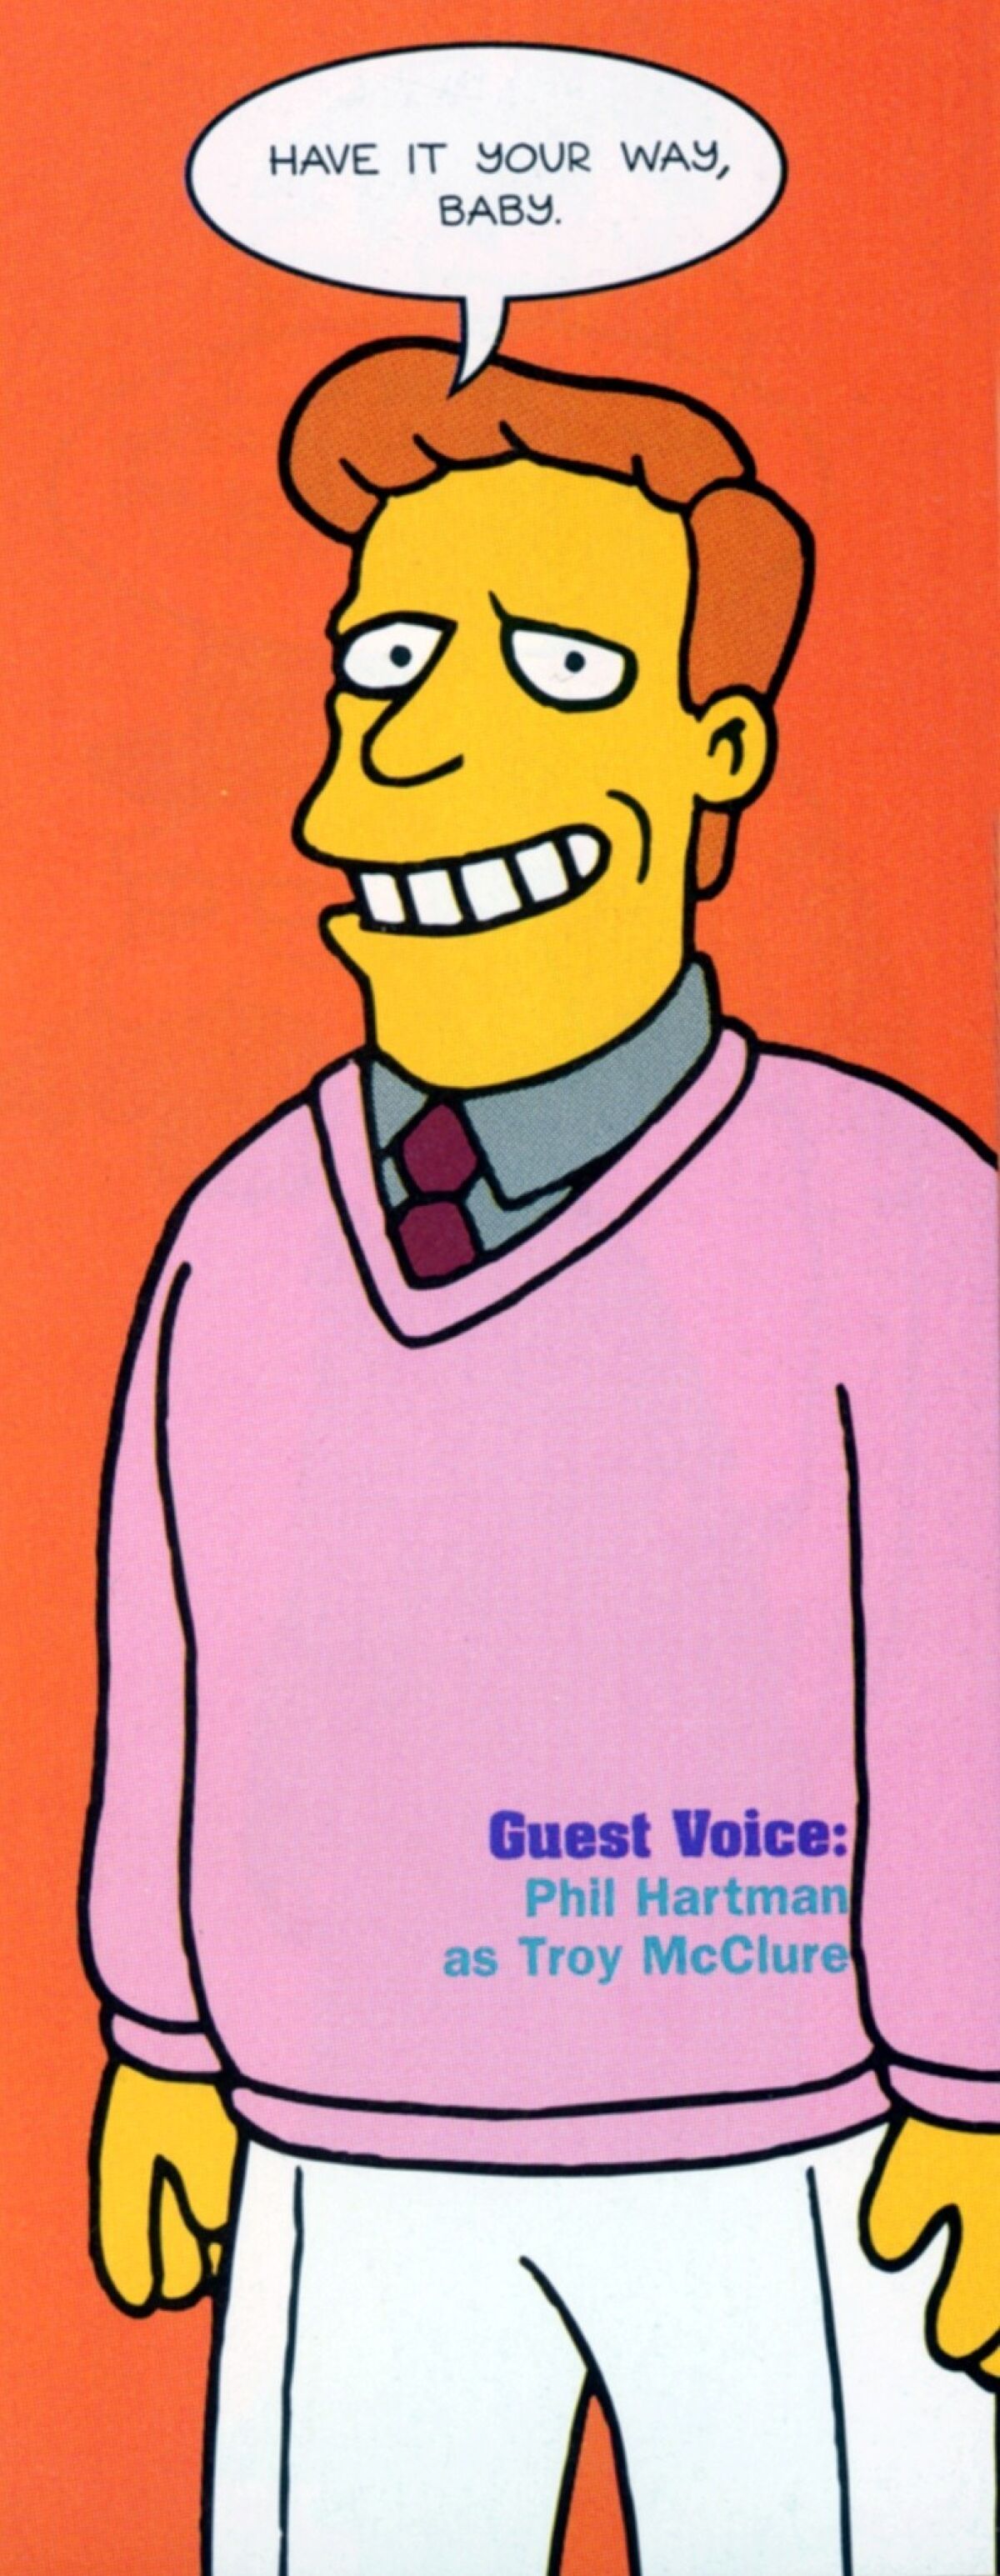 Phil Hartman was the voice of Troy McClure, a character on "The Simpsons." (NBC)